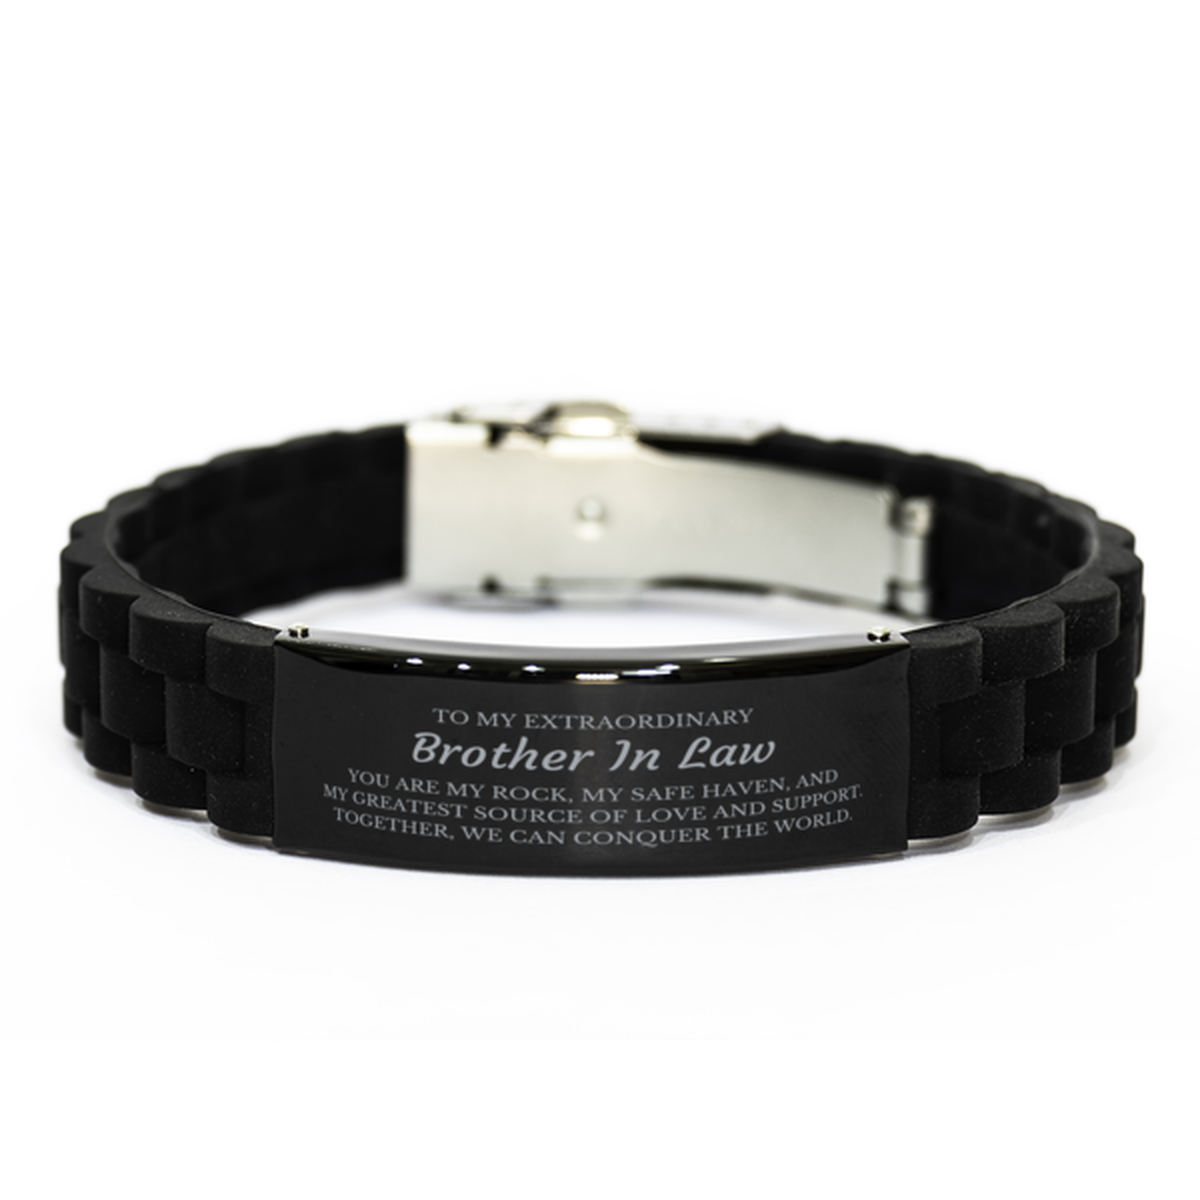 To My Extraordinary Brother In Law Gifts, Together, we can conquer the world, Birthday Black Glidelock Clasp Bracelet For Brother In Law, Christmas Gifts For Brother In Law